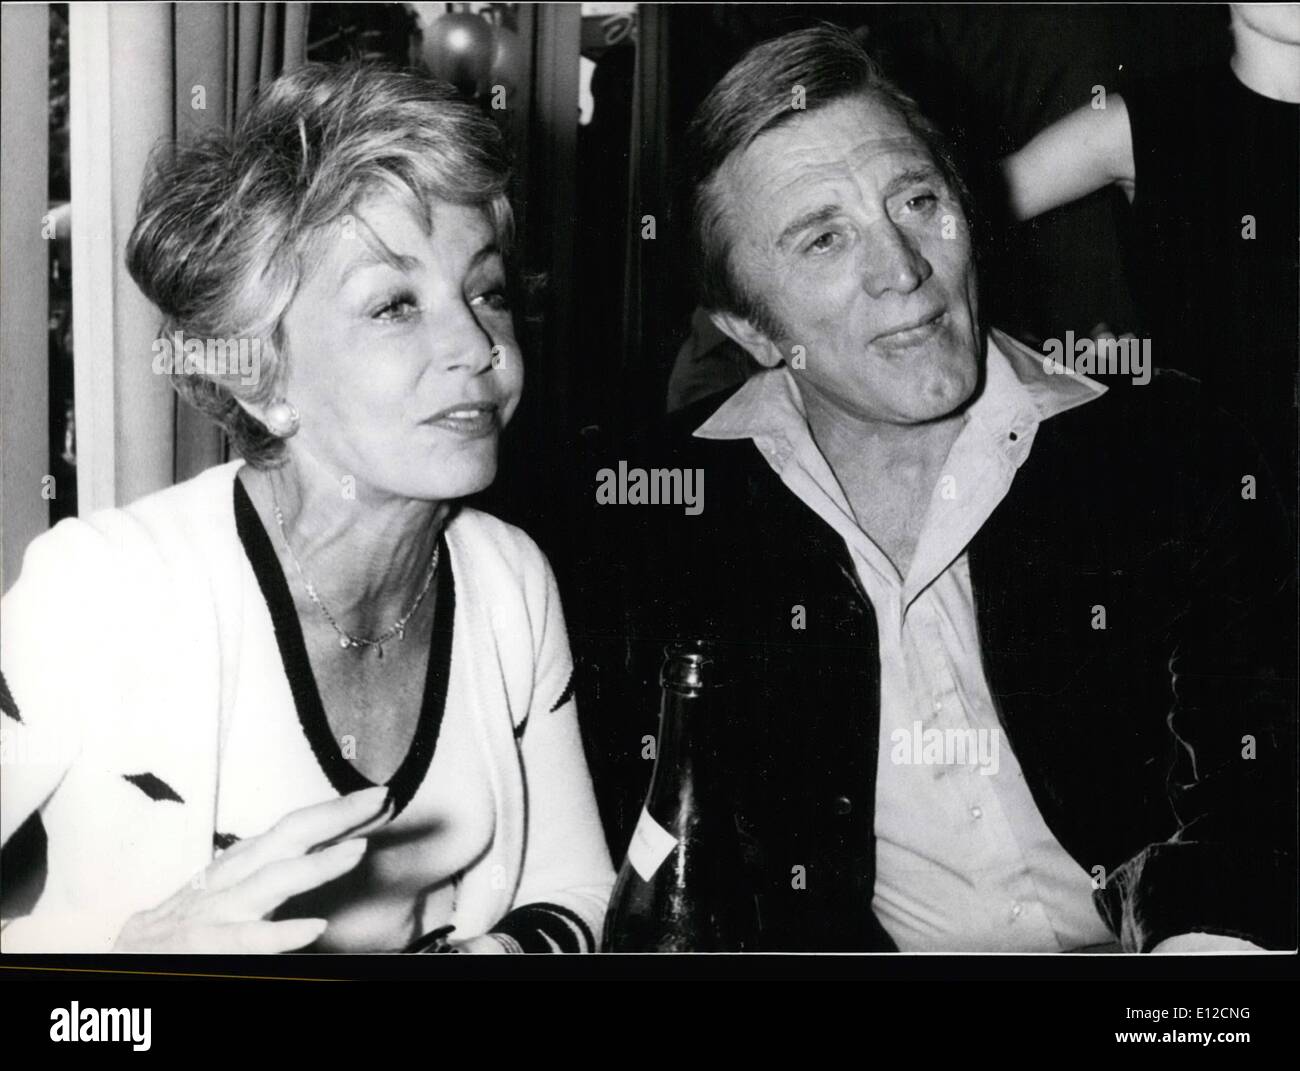 Dec. 16, 2011 - Kirk Douglas will become 60 on December 9th 1976. On December 9th 1976, Hollywood star Kirk Douglas (seen here with his wife Anne) will become 60 years old. The actor was born in New York state as the son of Russian immigrants. After studies at the American Academy of Dramatic Arts, he came out on Broadway in 1941, but then had to join tha Navy during the war. In 1946 Kirk Douglas played his first role in a movie picture called The Strange Love of Marty Ivers , with Barbara Stanwyck Stock Photo